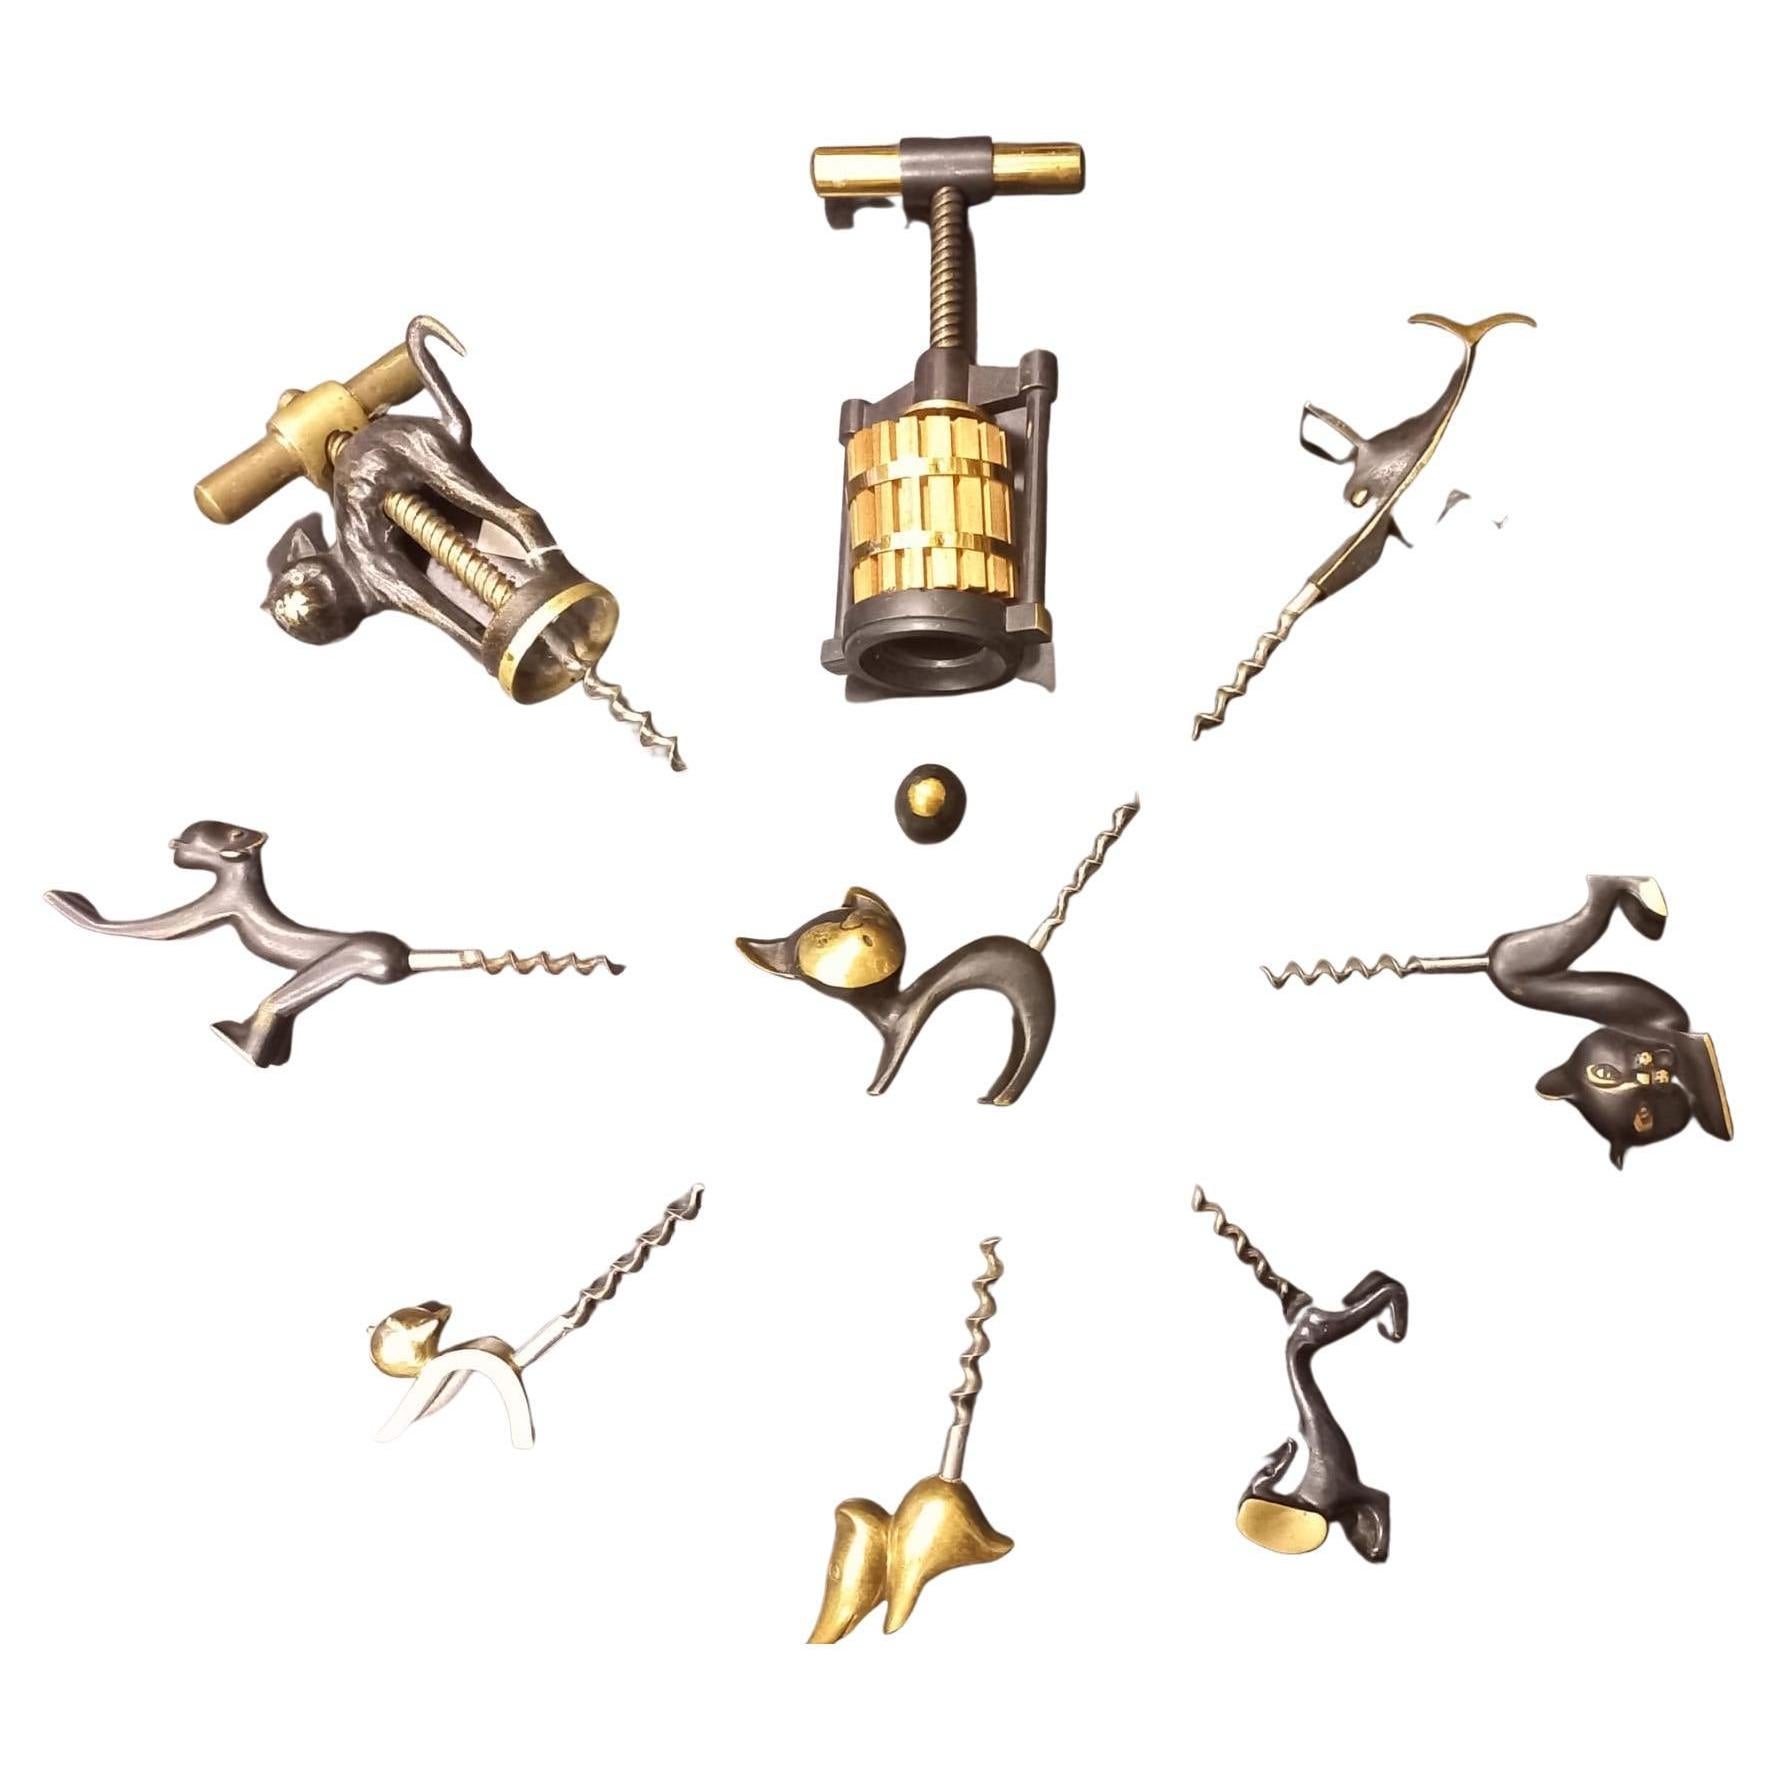 Numbering is in clockwise order in the series 

Richard Rohac:
1st corkscrew in the shape of a press 460€.
2nd Viennese bronze swordfish 350€
3rd Viennese bronze cat 490€
4th Viennese bronze basset hound 380€
5th vienna bronze mouse 460€
6.